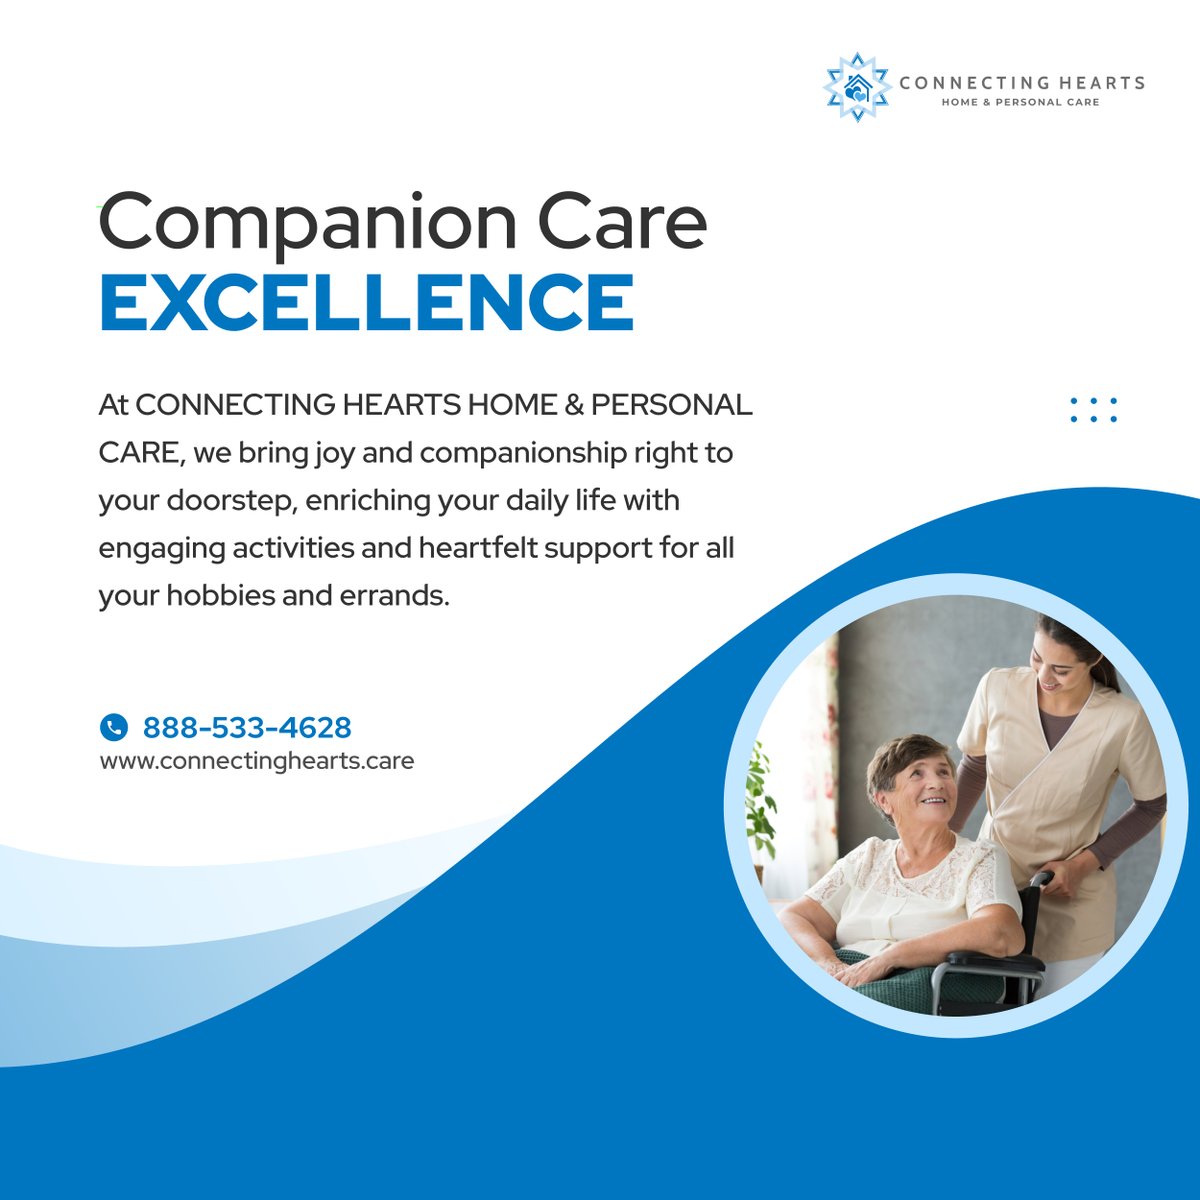 Embrace life's pleasures with our companion care, ensuring no moment feels lonely or dull. 

Trust CONNECTING HEARTS HOME & PERSONAL CARE for meaningful companionship. 

#PasadenaCA #HomeCare #CompanionCare #SocialEngagement #MentalWellness